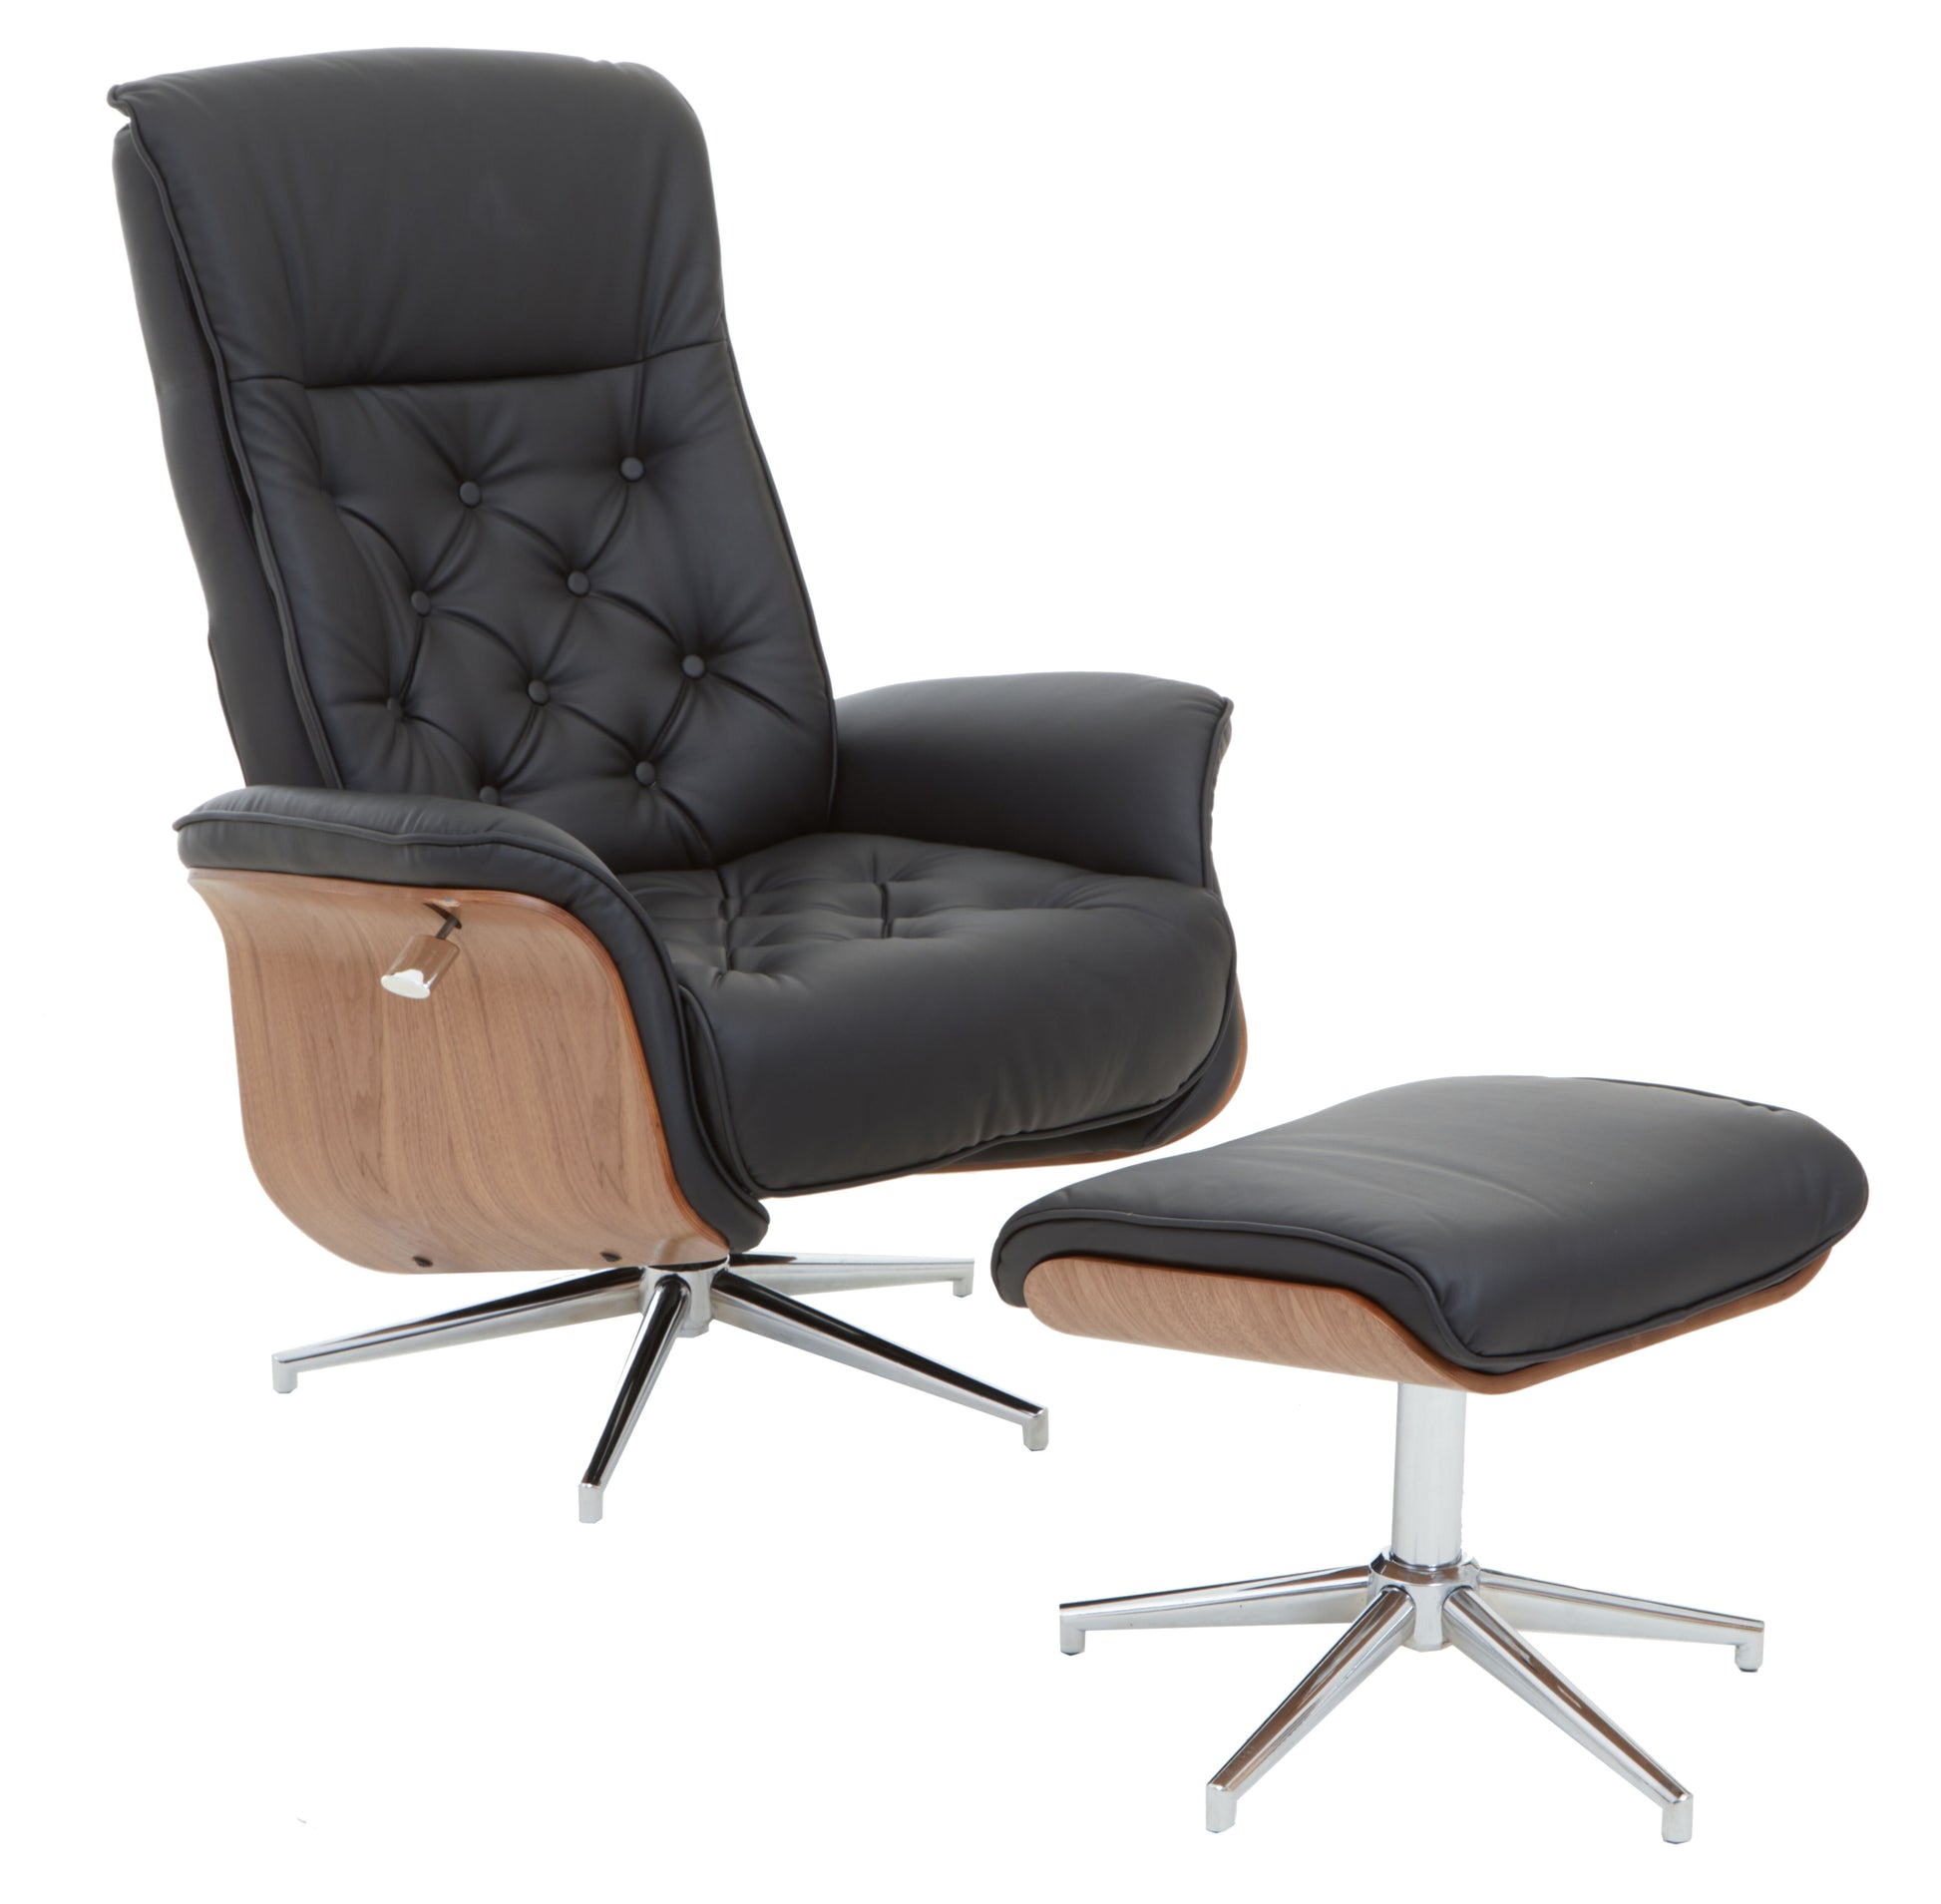 Warrington Leather Effect Recliner And Footstool - NIXO Furniture.com